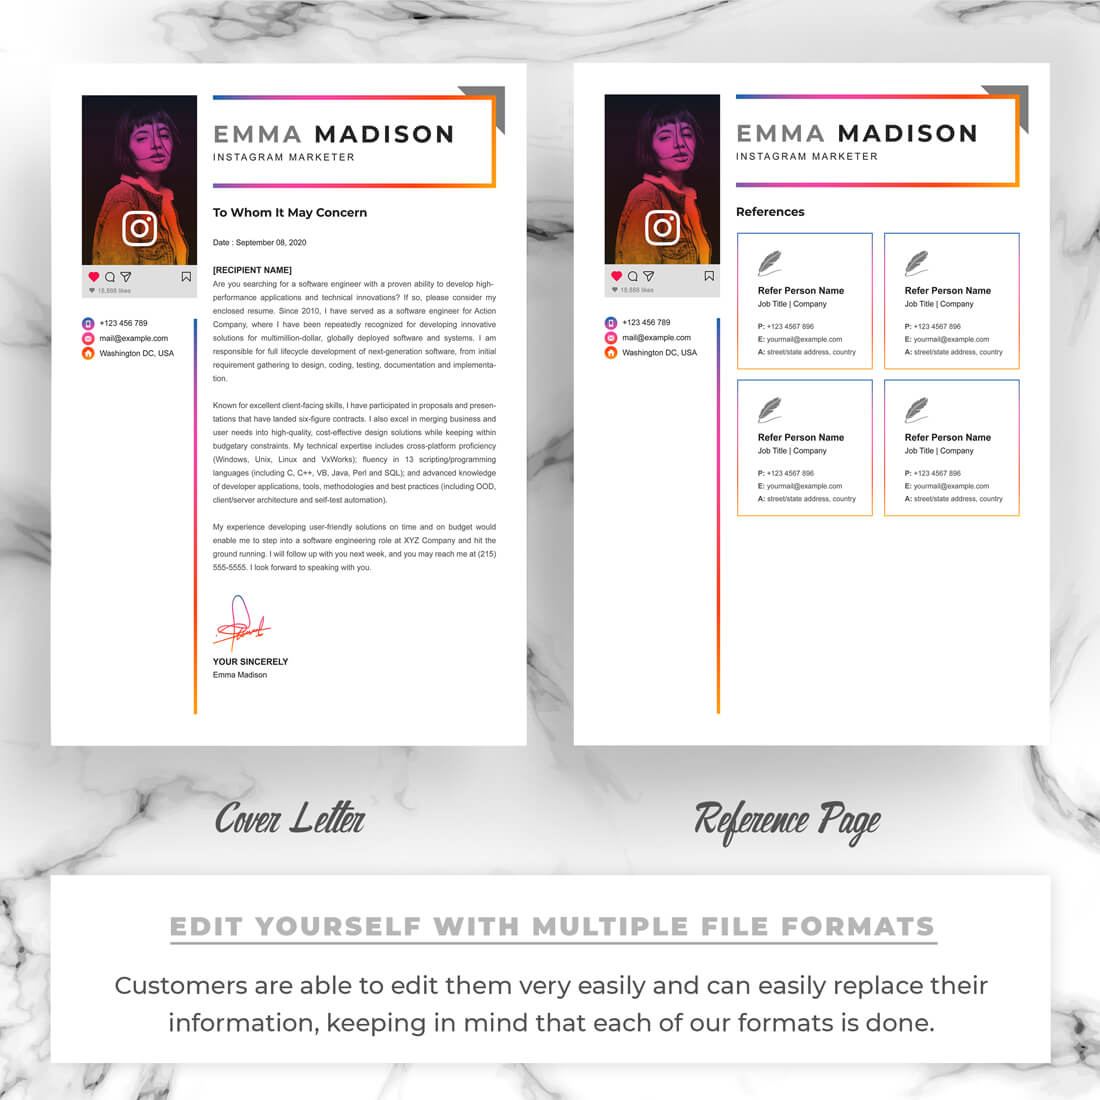 Two pages of the Instagram Marketer | Social Media Resume Template Design.